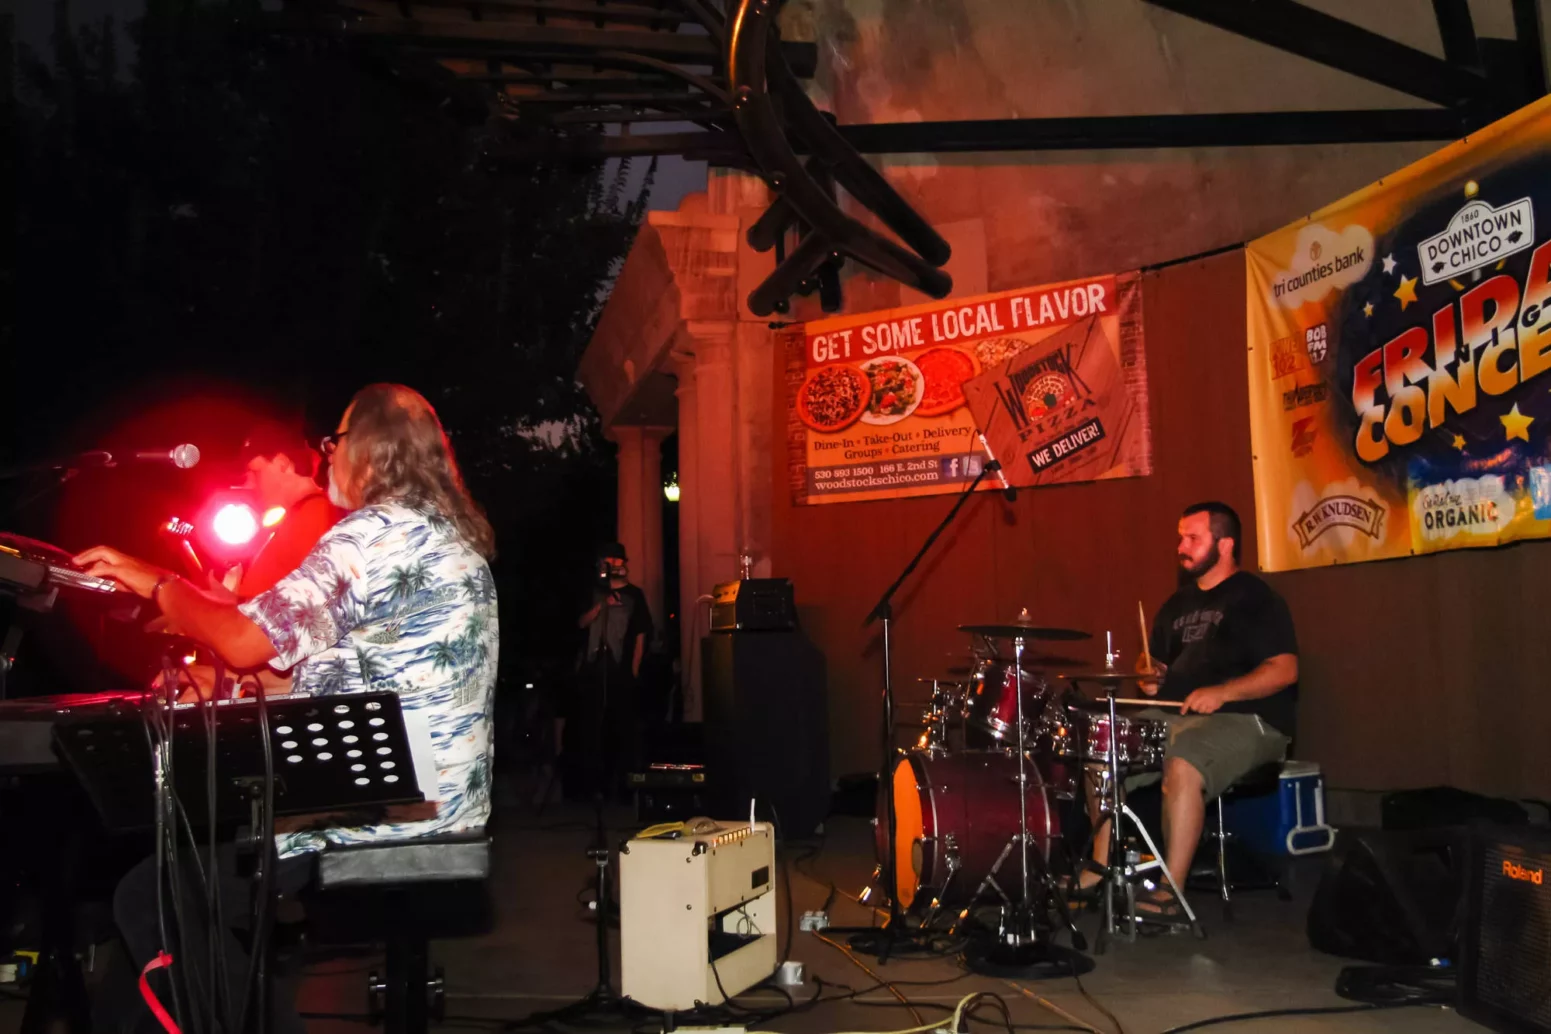 A view of the keyboardist and drummer as The Jeff Pershing Band during Friday Night Concerts.